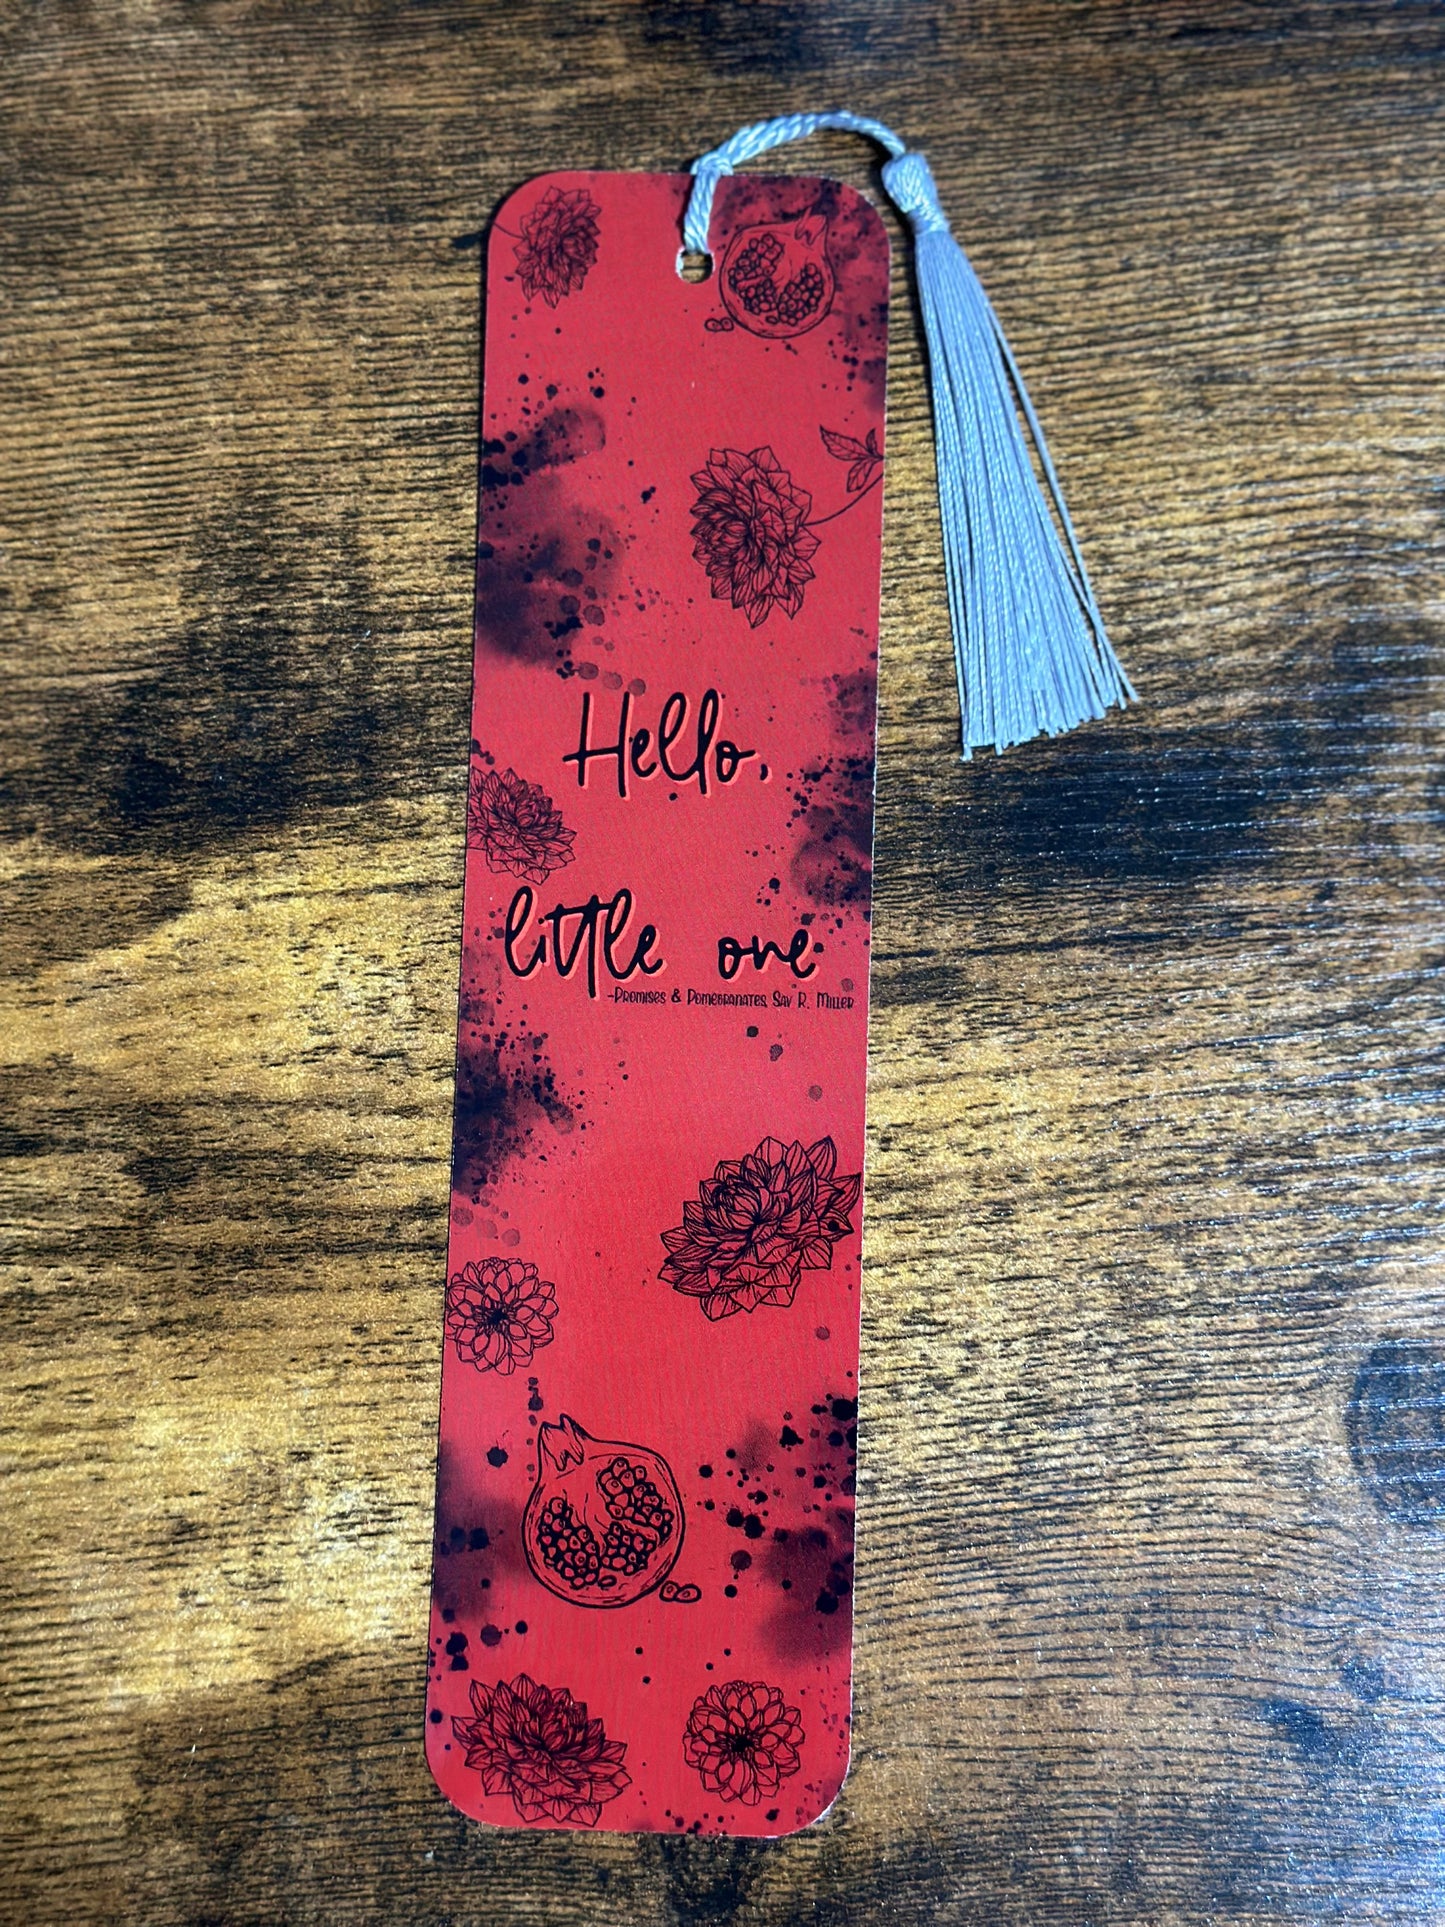 "Little One" Promises and Pomegranates Bookmark